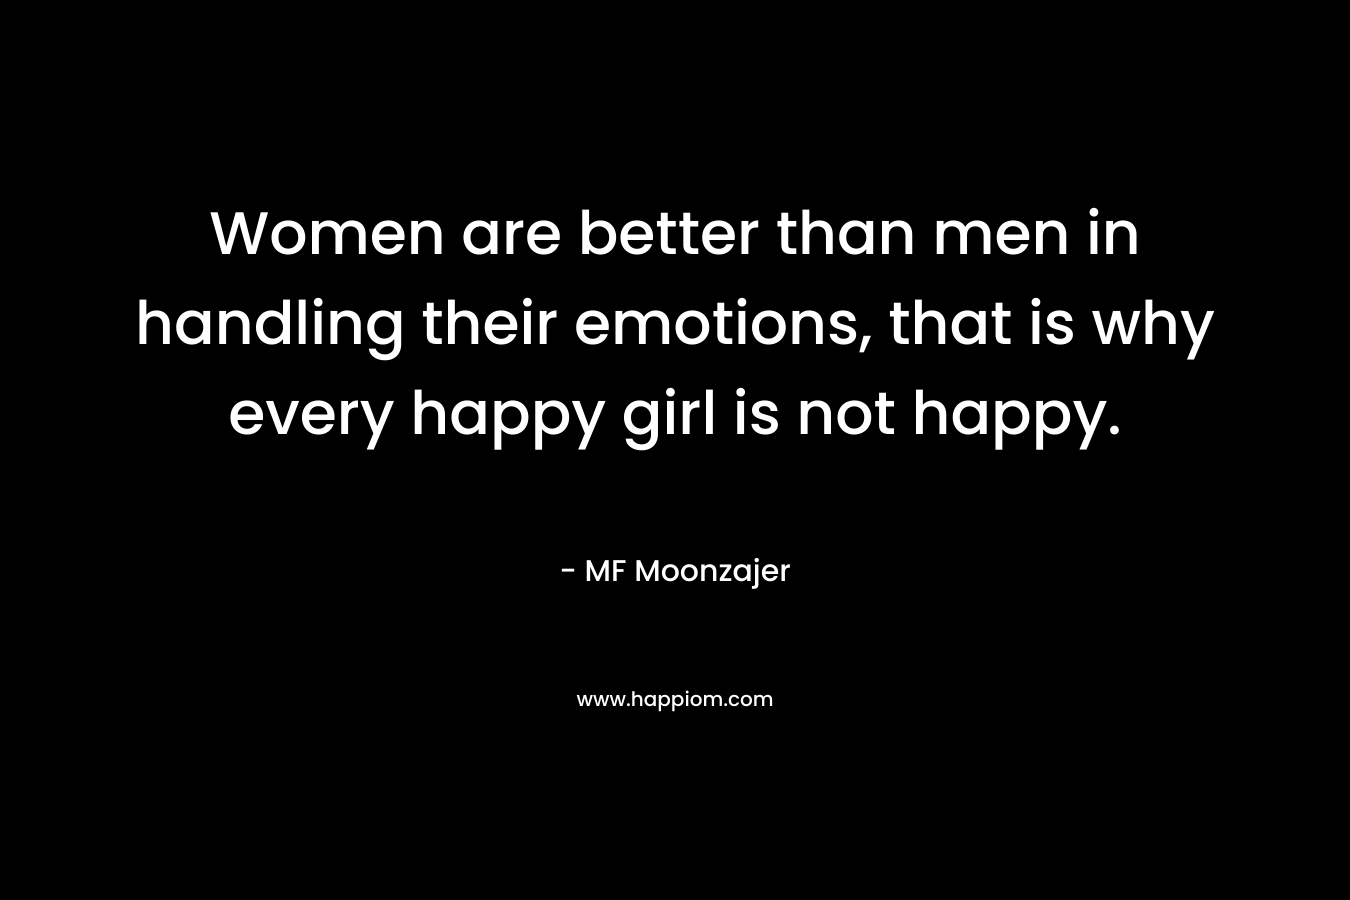 Women are better than men in handling their emotions, that is why every happy girl is not happy.